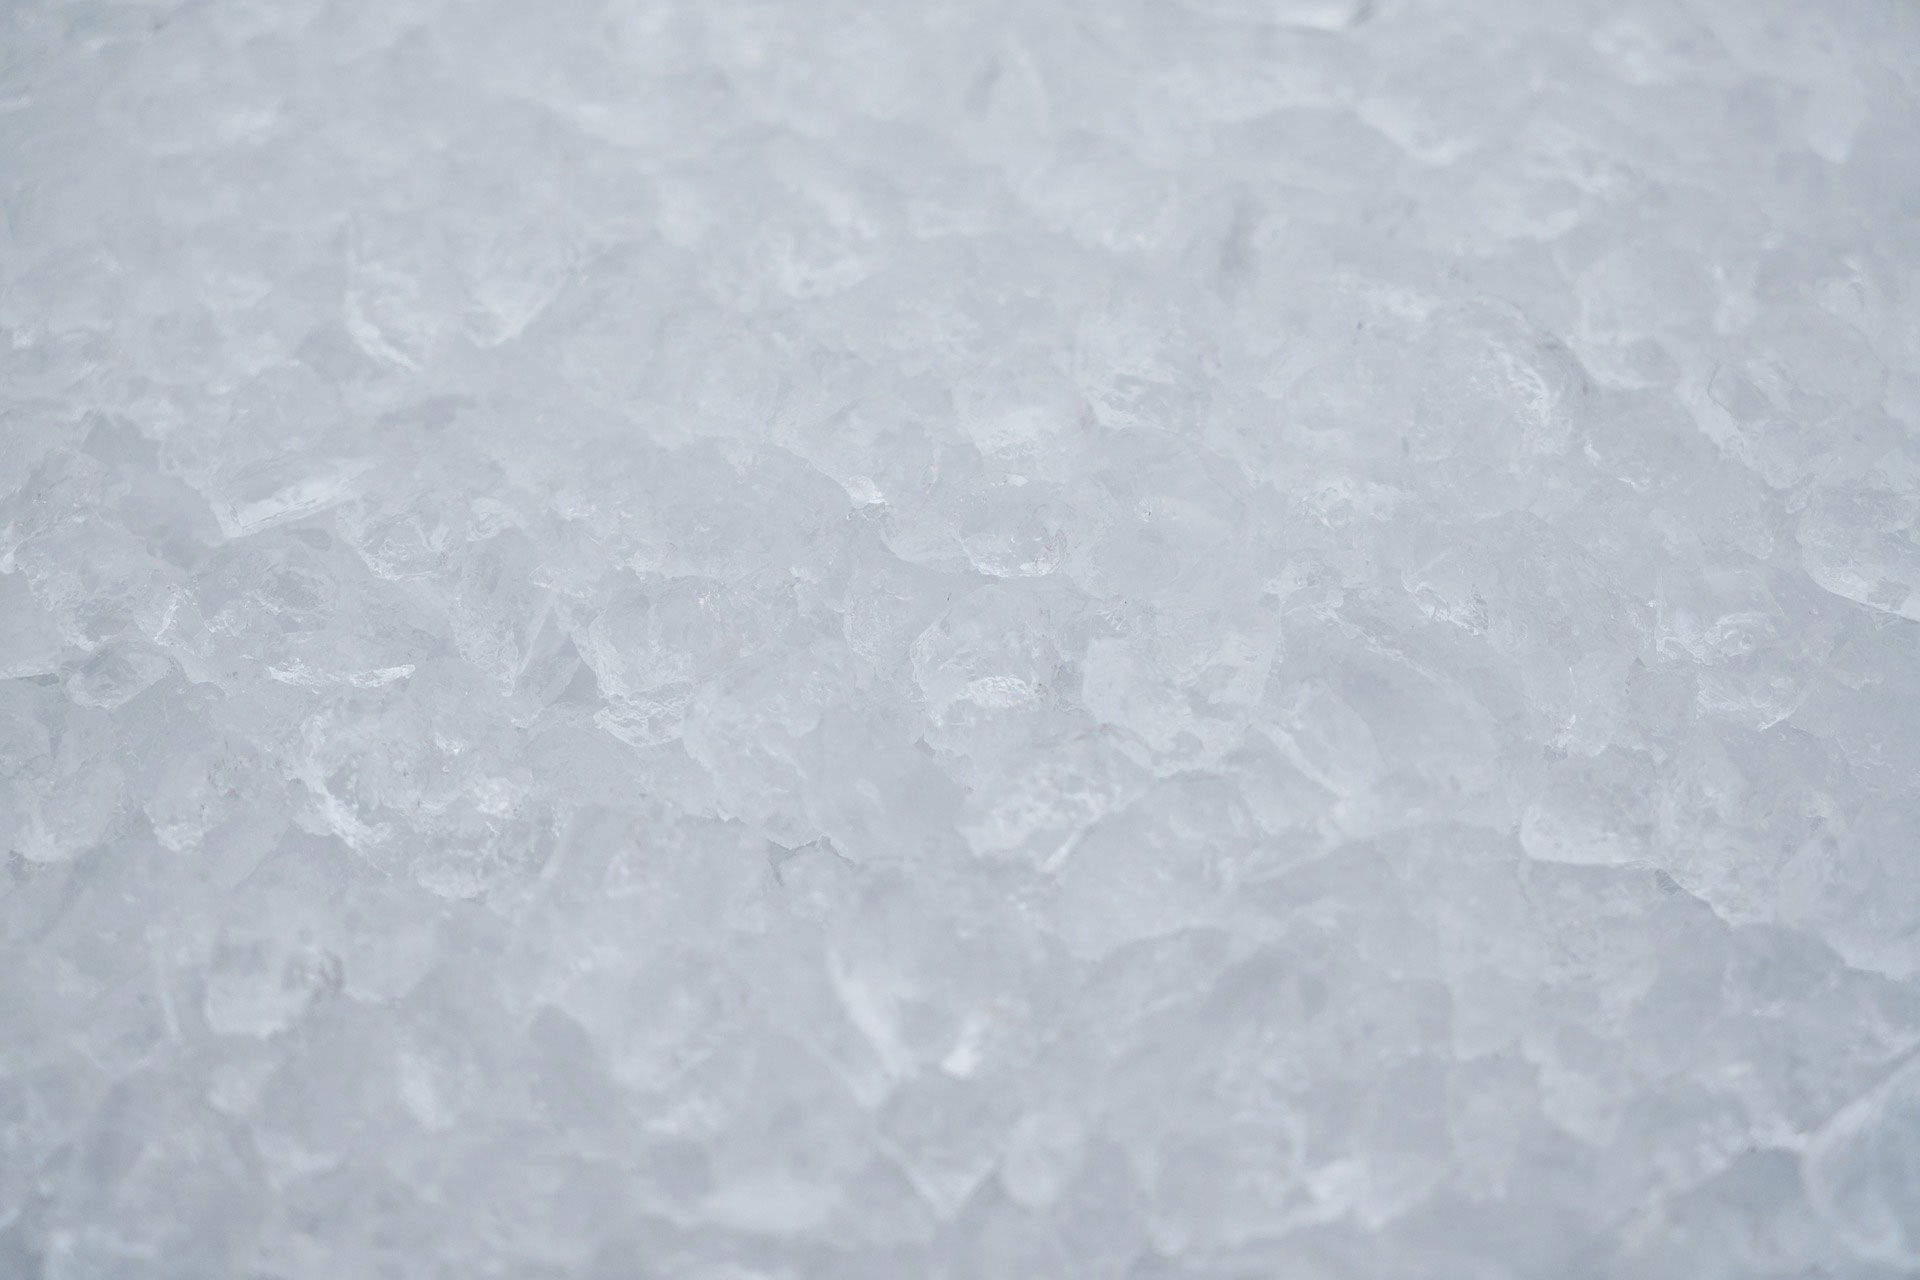 Is Ice On The Interior Refrigerator Wall Normal?